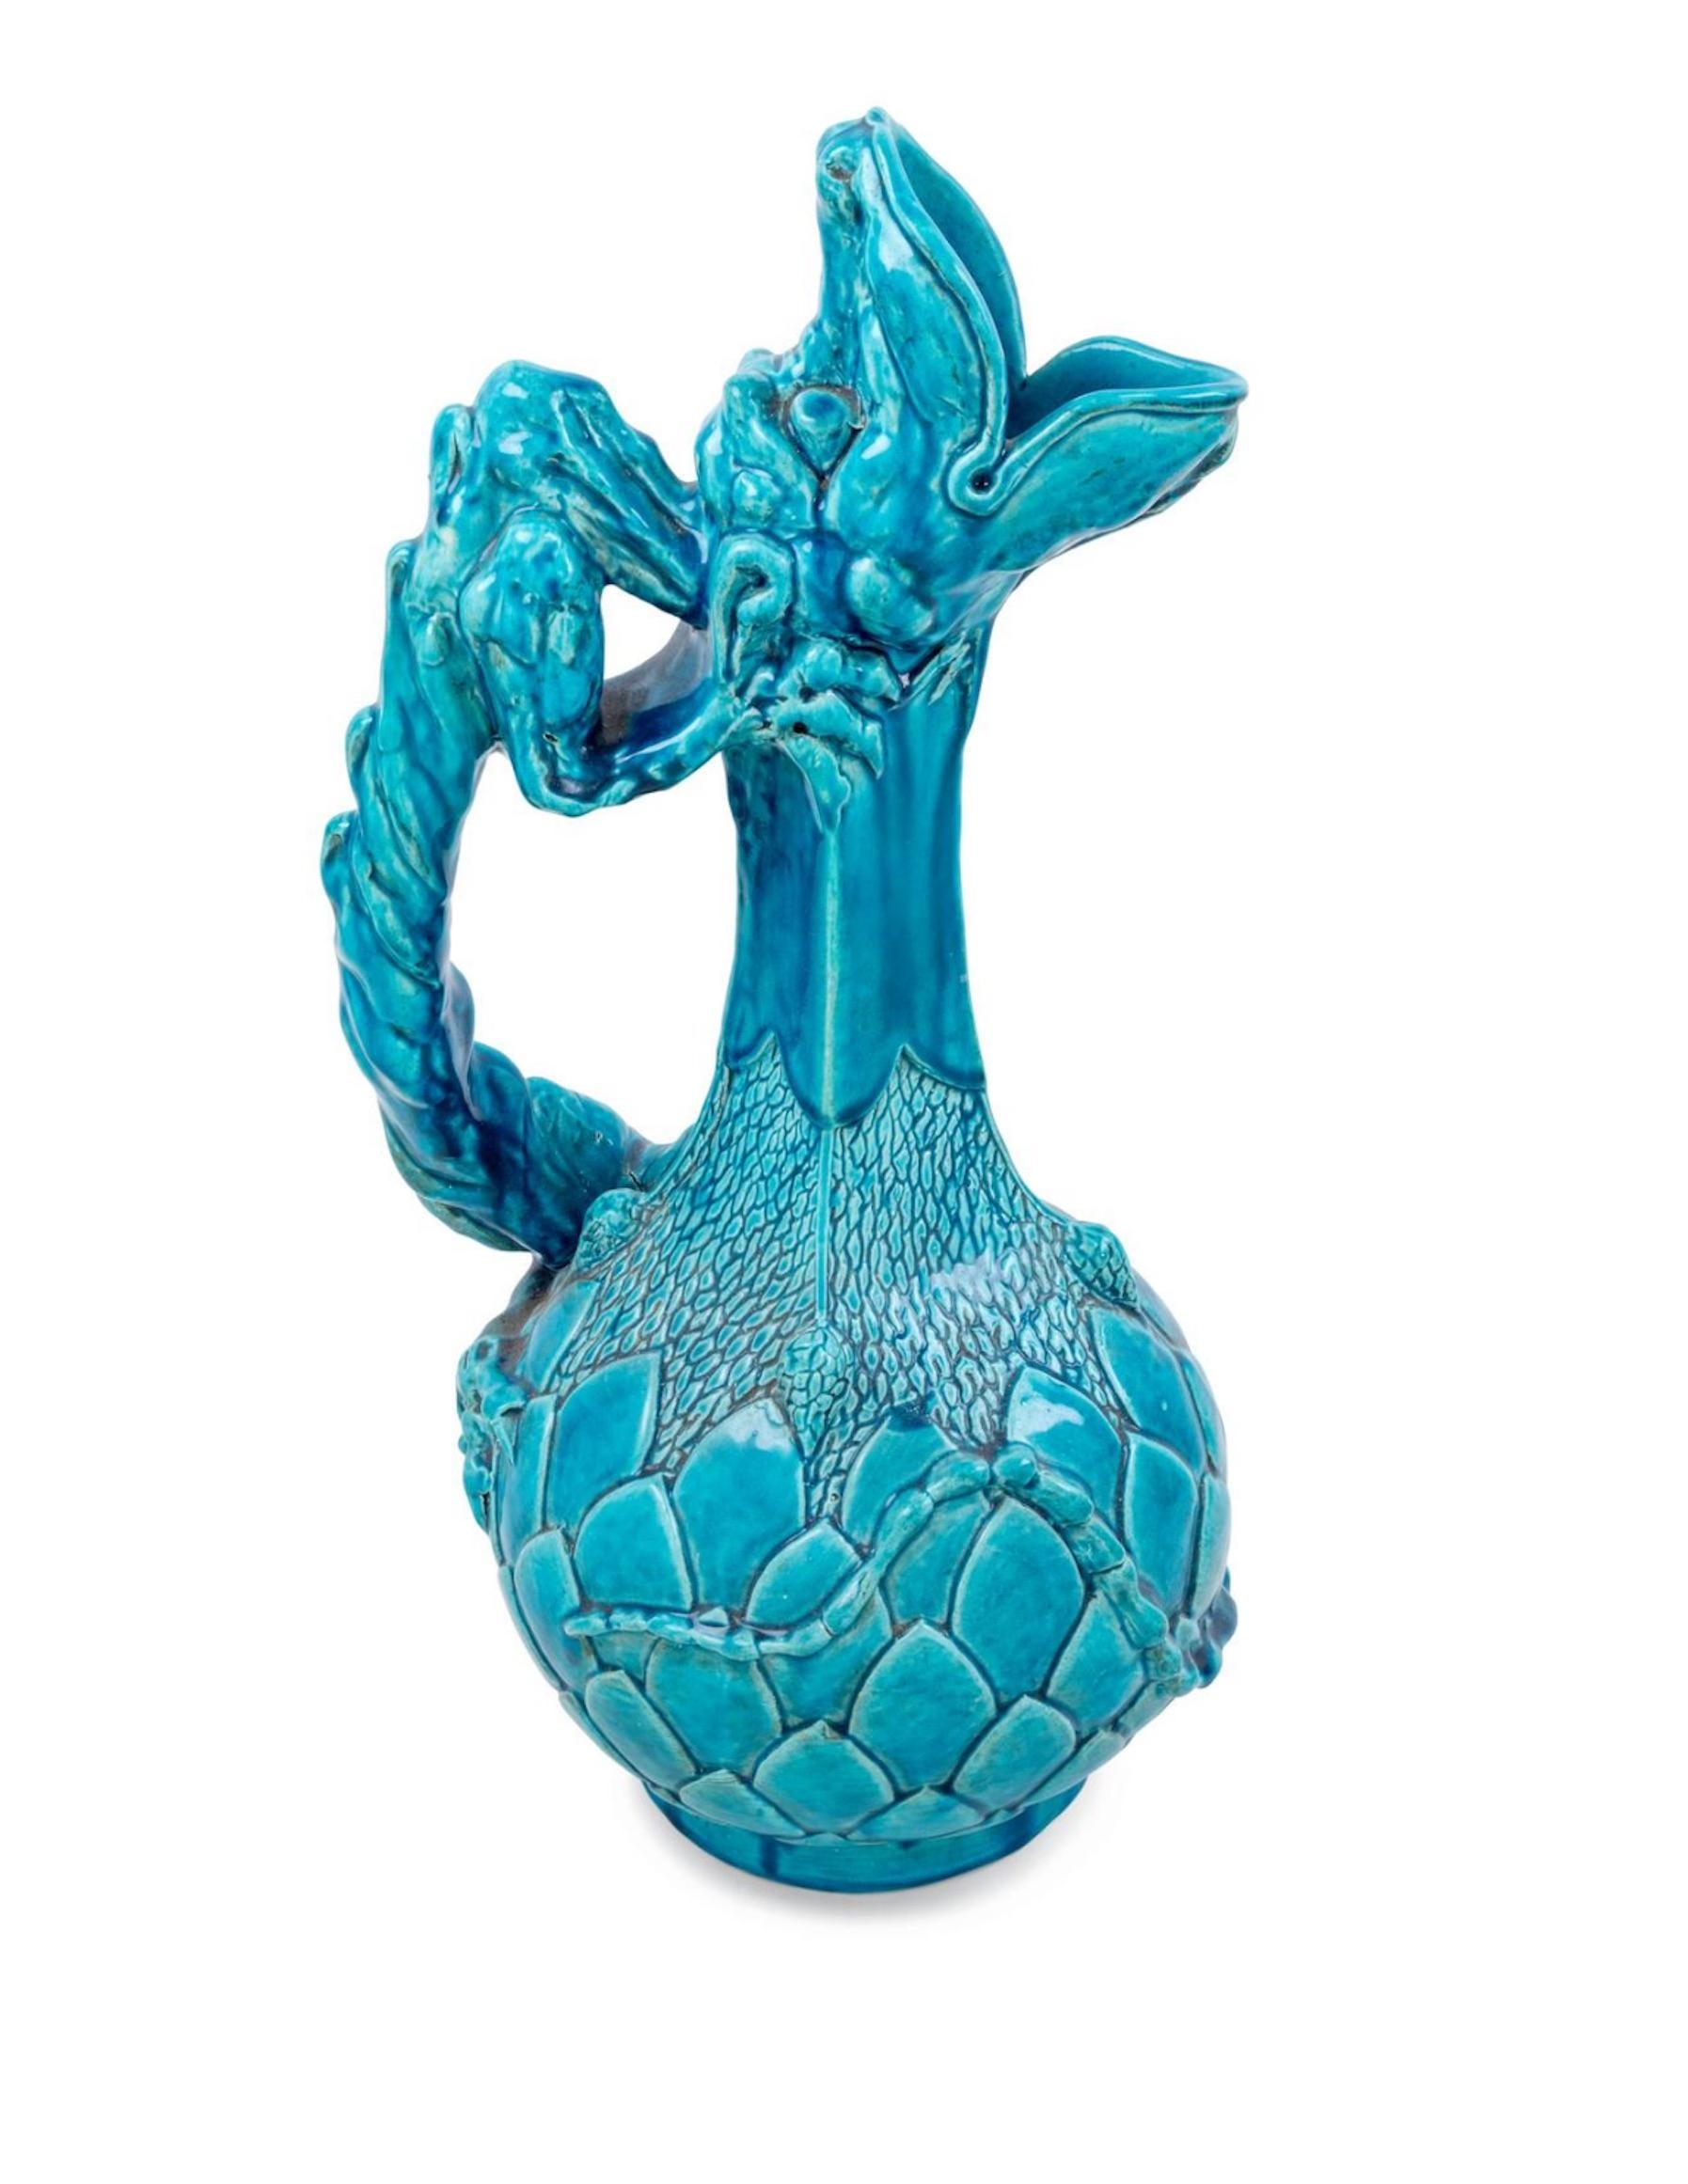 Hollywood Regency 19th Century ContinentalTurquoise Glazed Figural Ewer Attributed to Theodor Deck For Sale